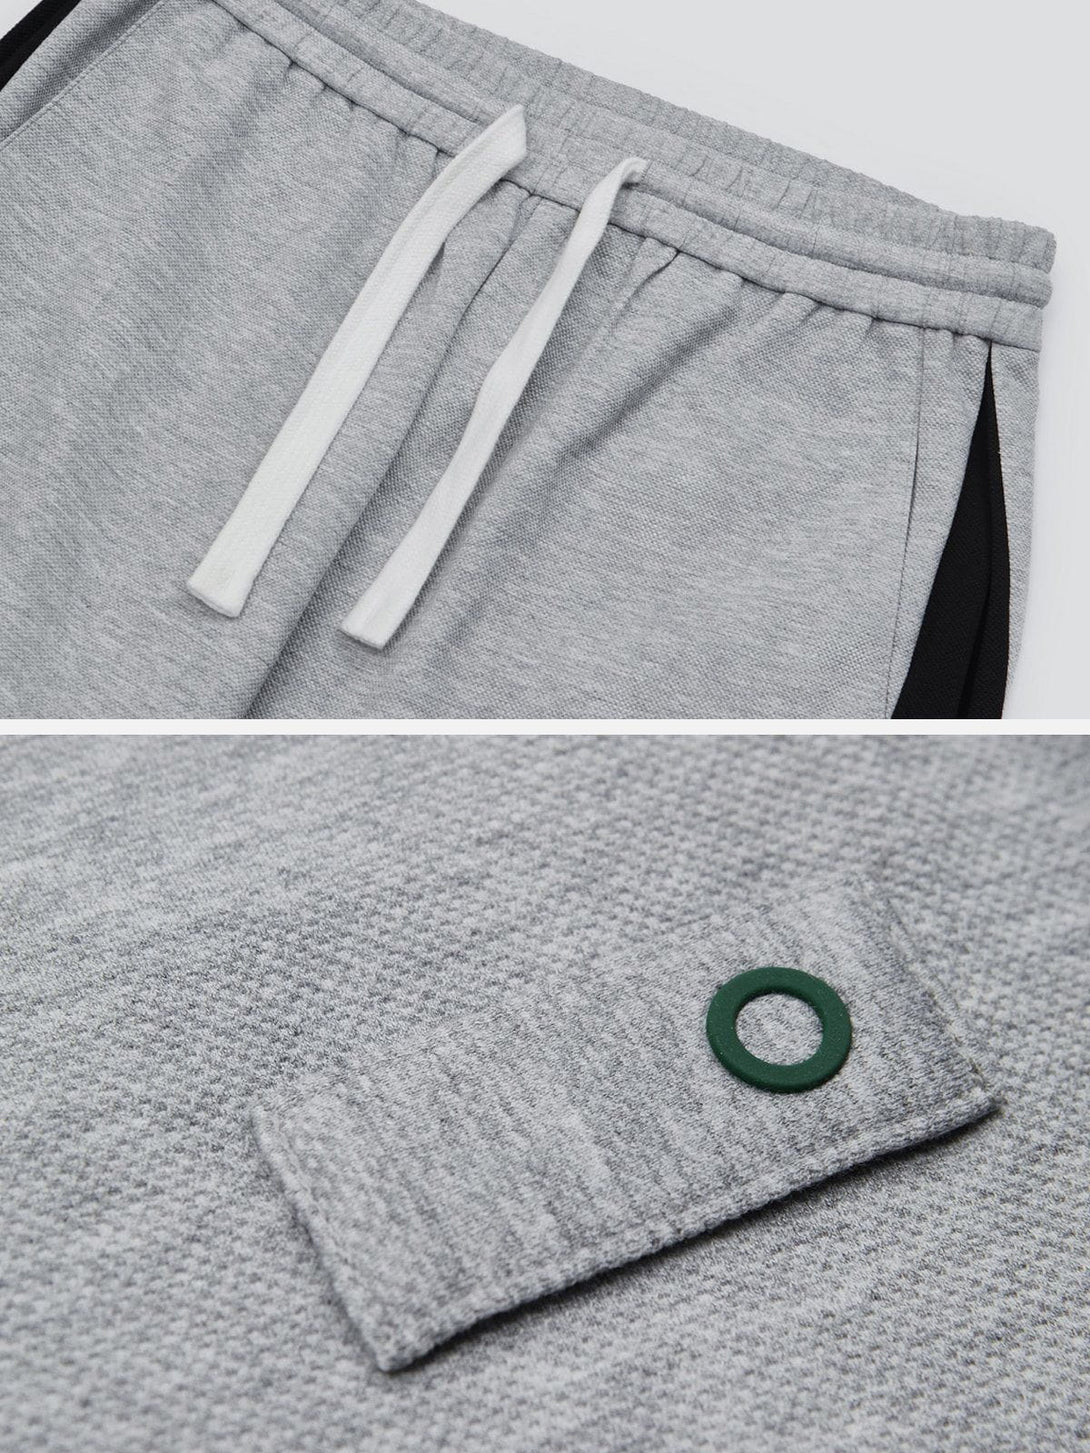 Levefly - Contrast Casual Sweatpants - Streetwear Fashion - levefly.com